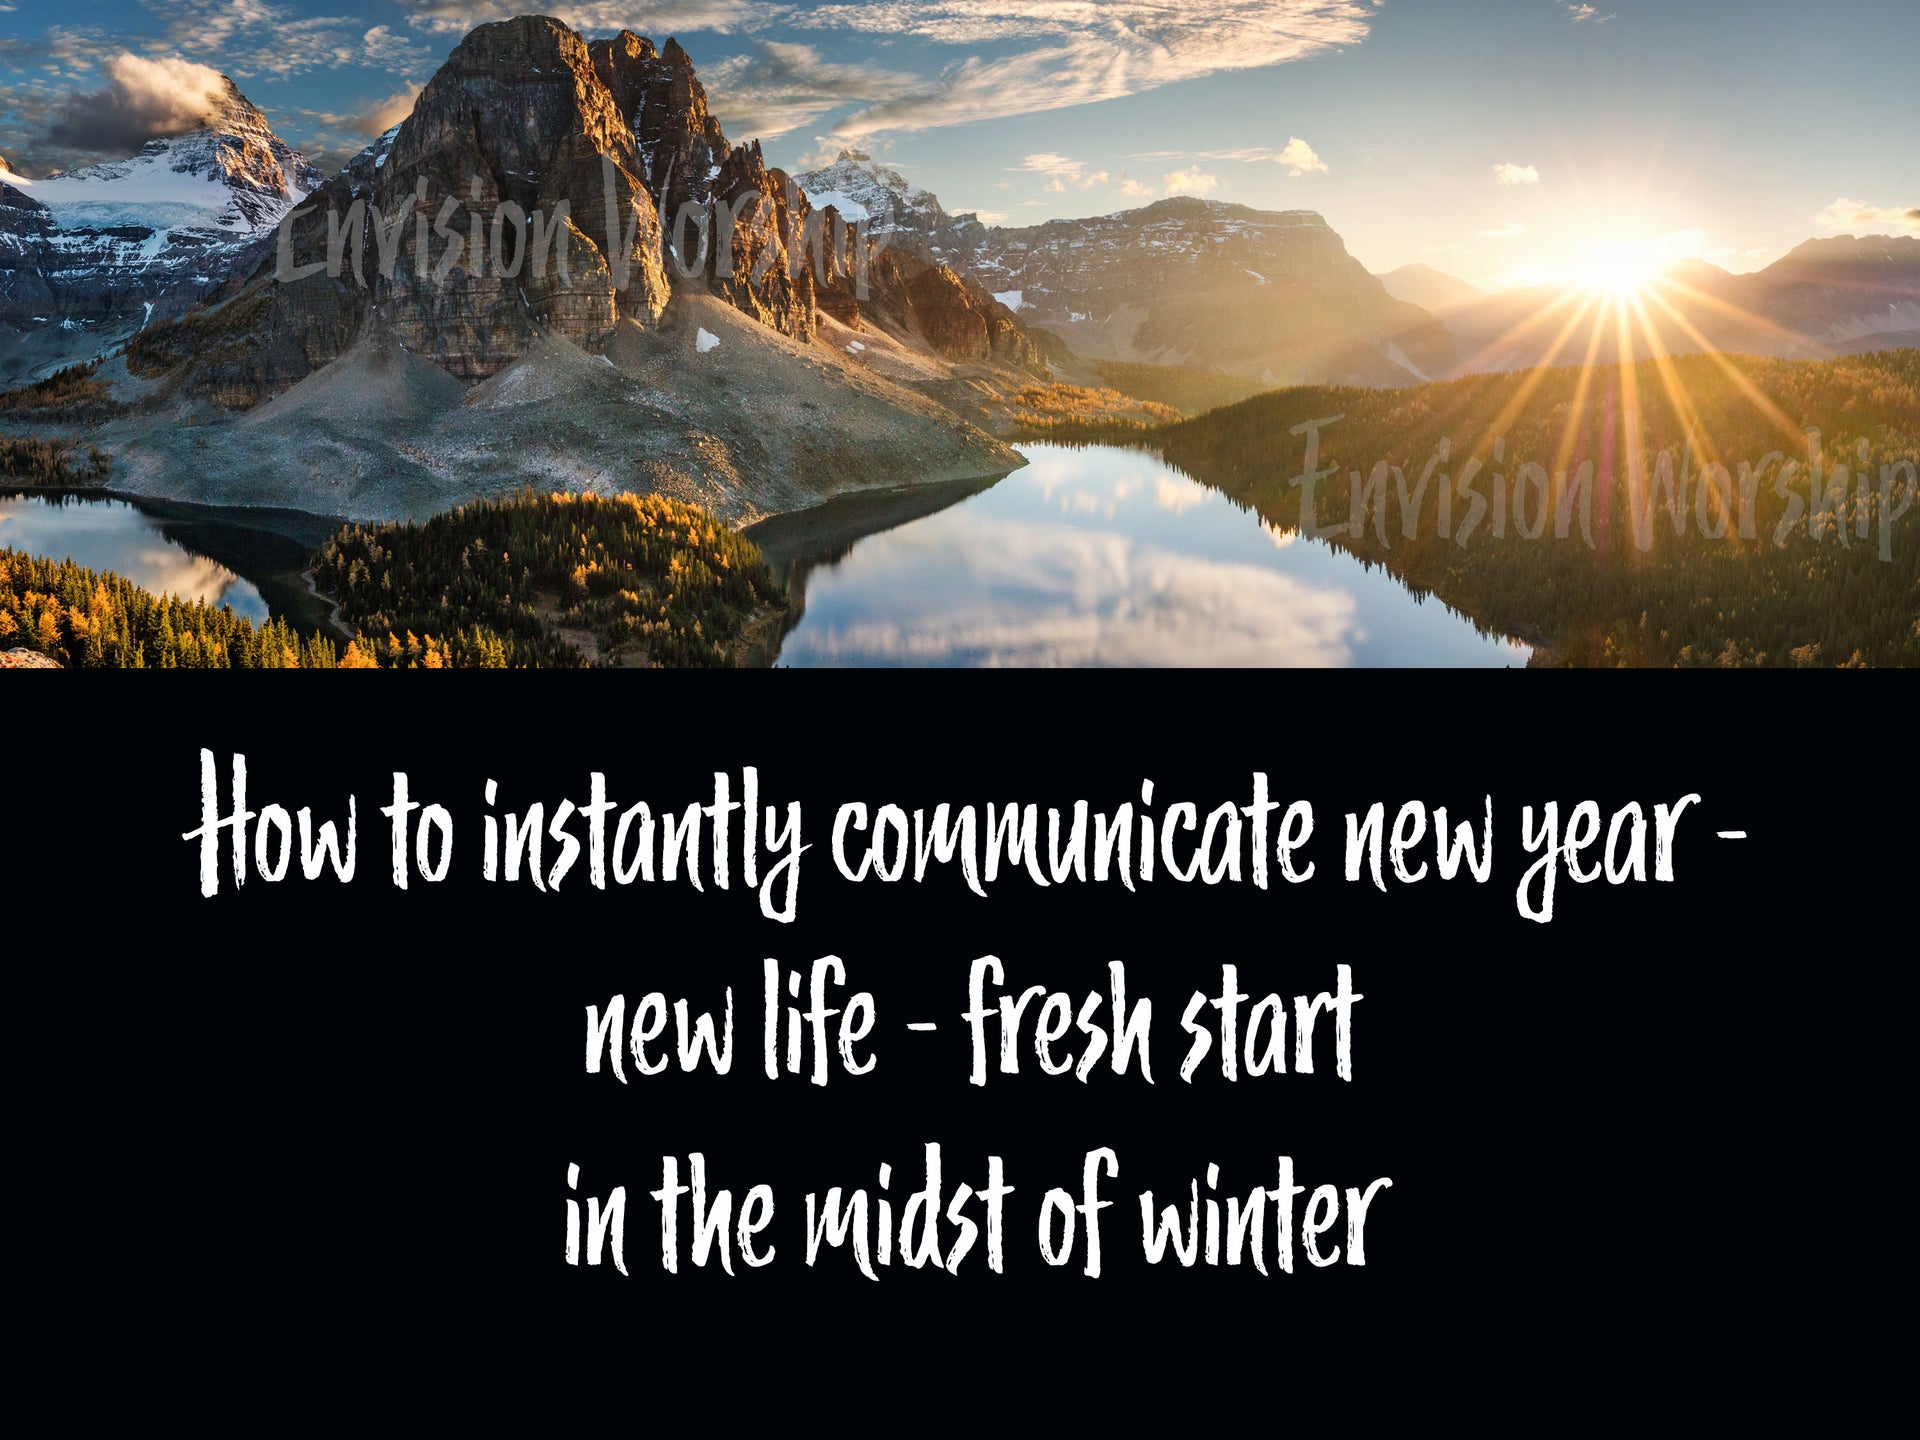 New Year Images Are Tricky - Church PowerPoints